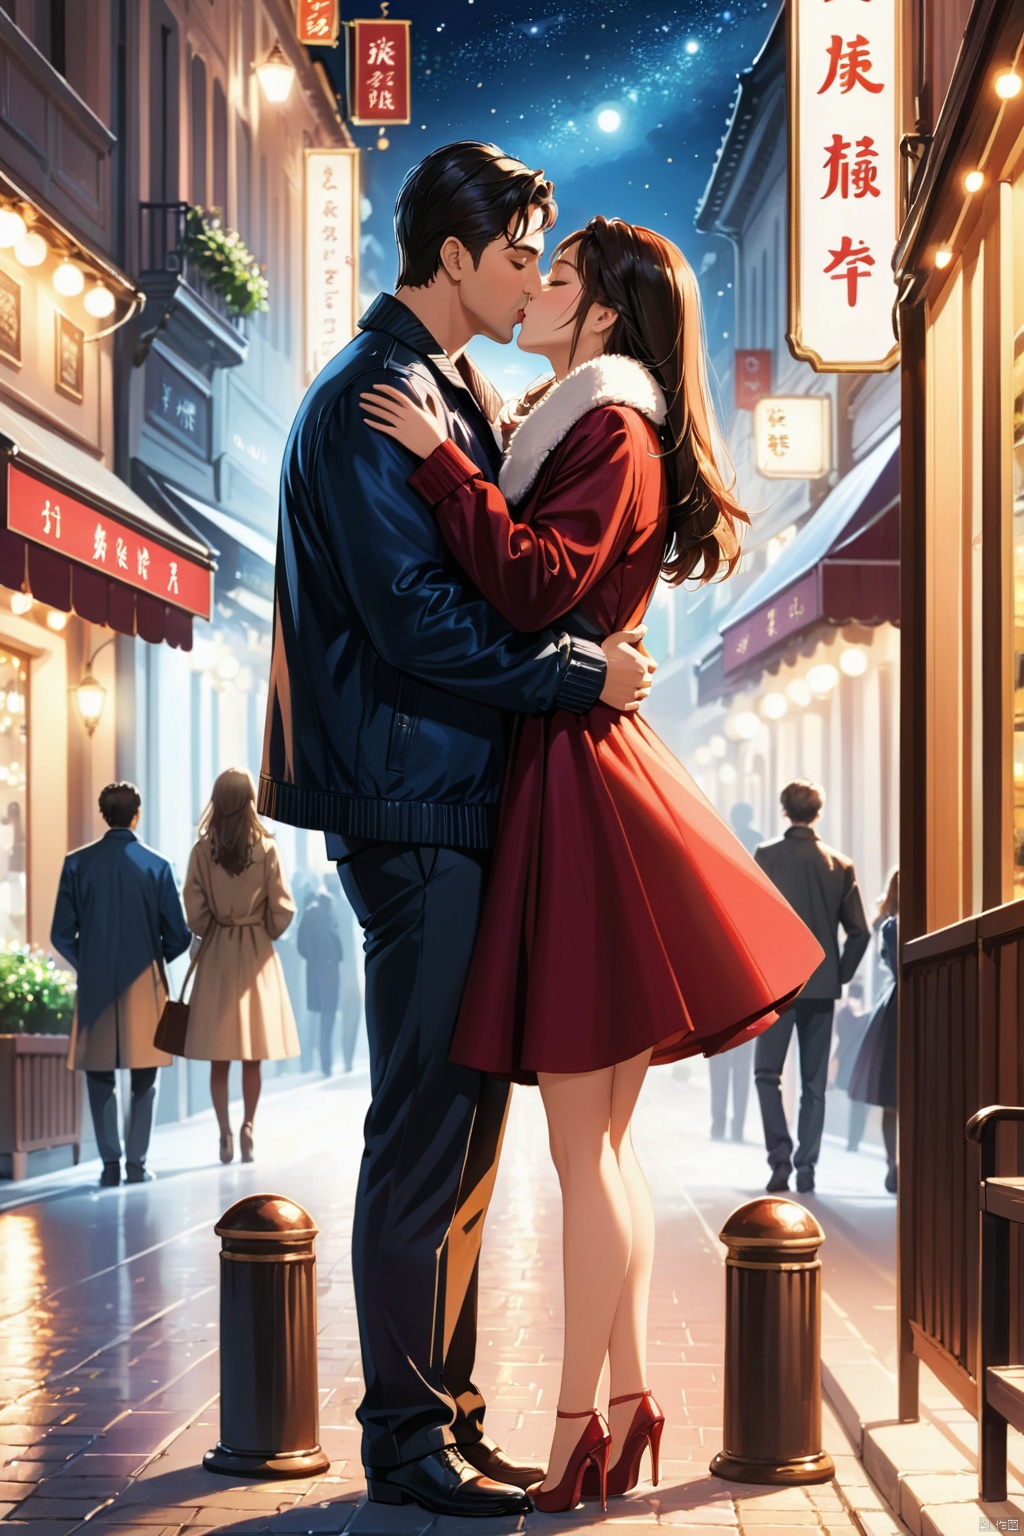  ((Masterpiece))),((Best Quality))),There are many people watching, a man watching a couple kissing, couples hugging and kissing, the street at night,